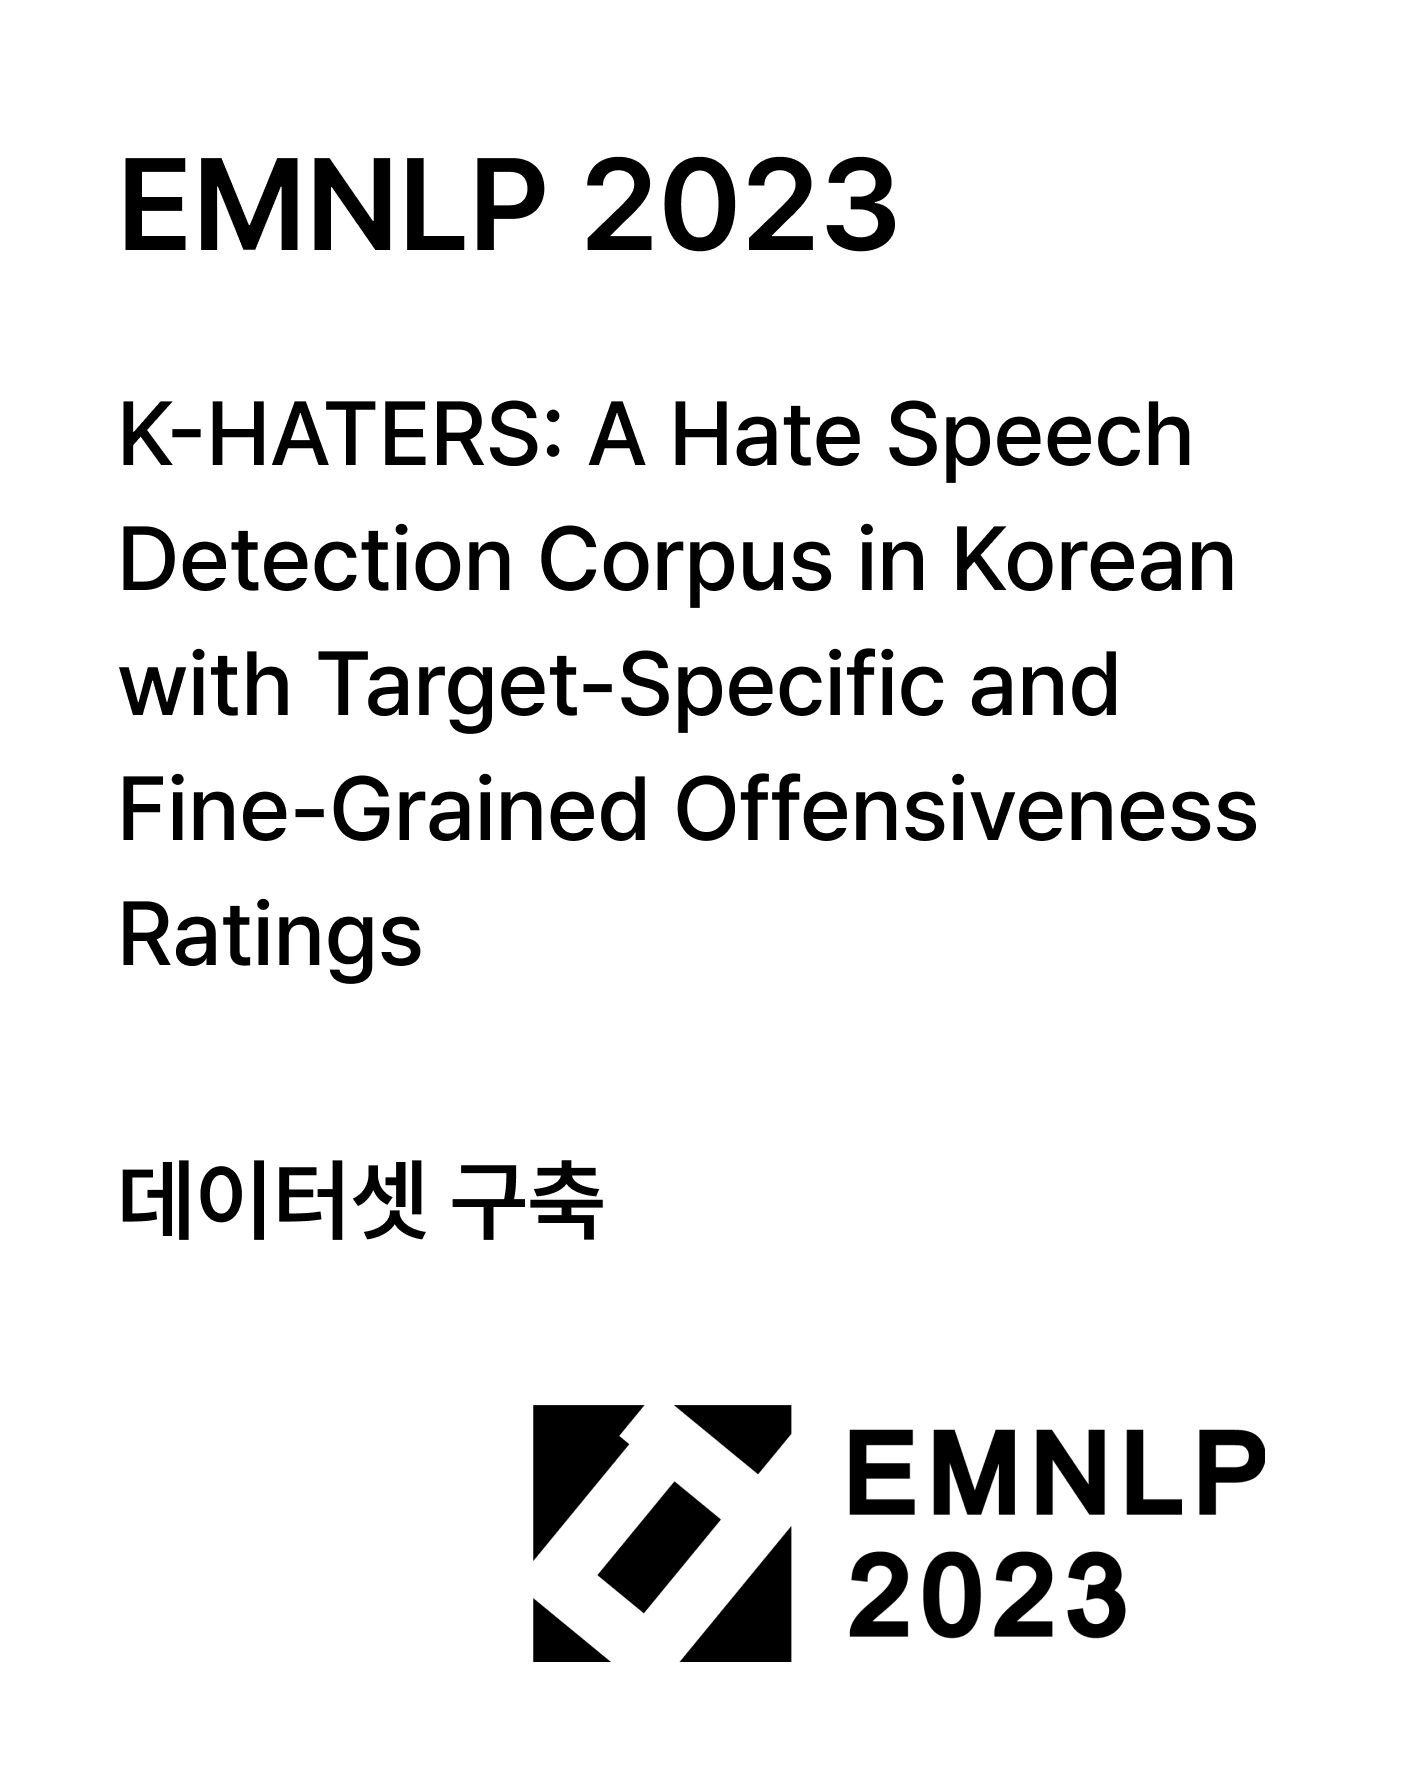 K-HATERS: A Hate Speech Detection Corpus in Korean with Target-Specific and Fine-Grained Offensiveness Ratings